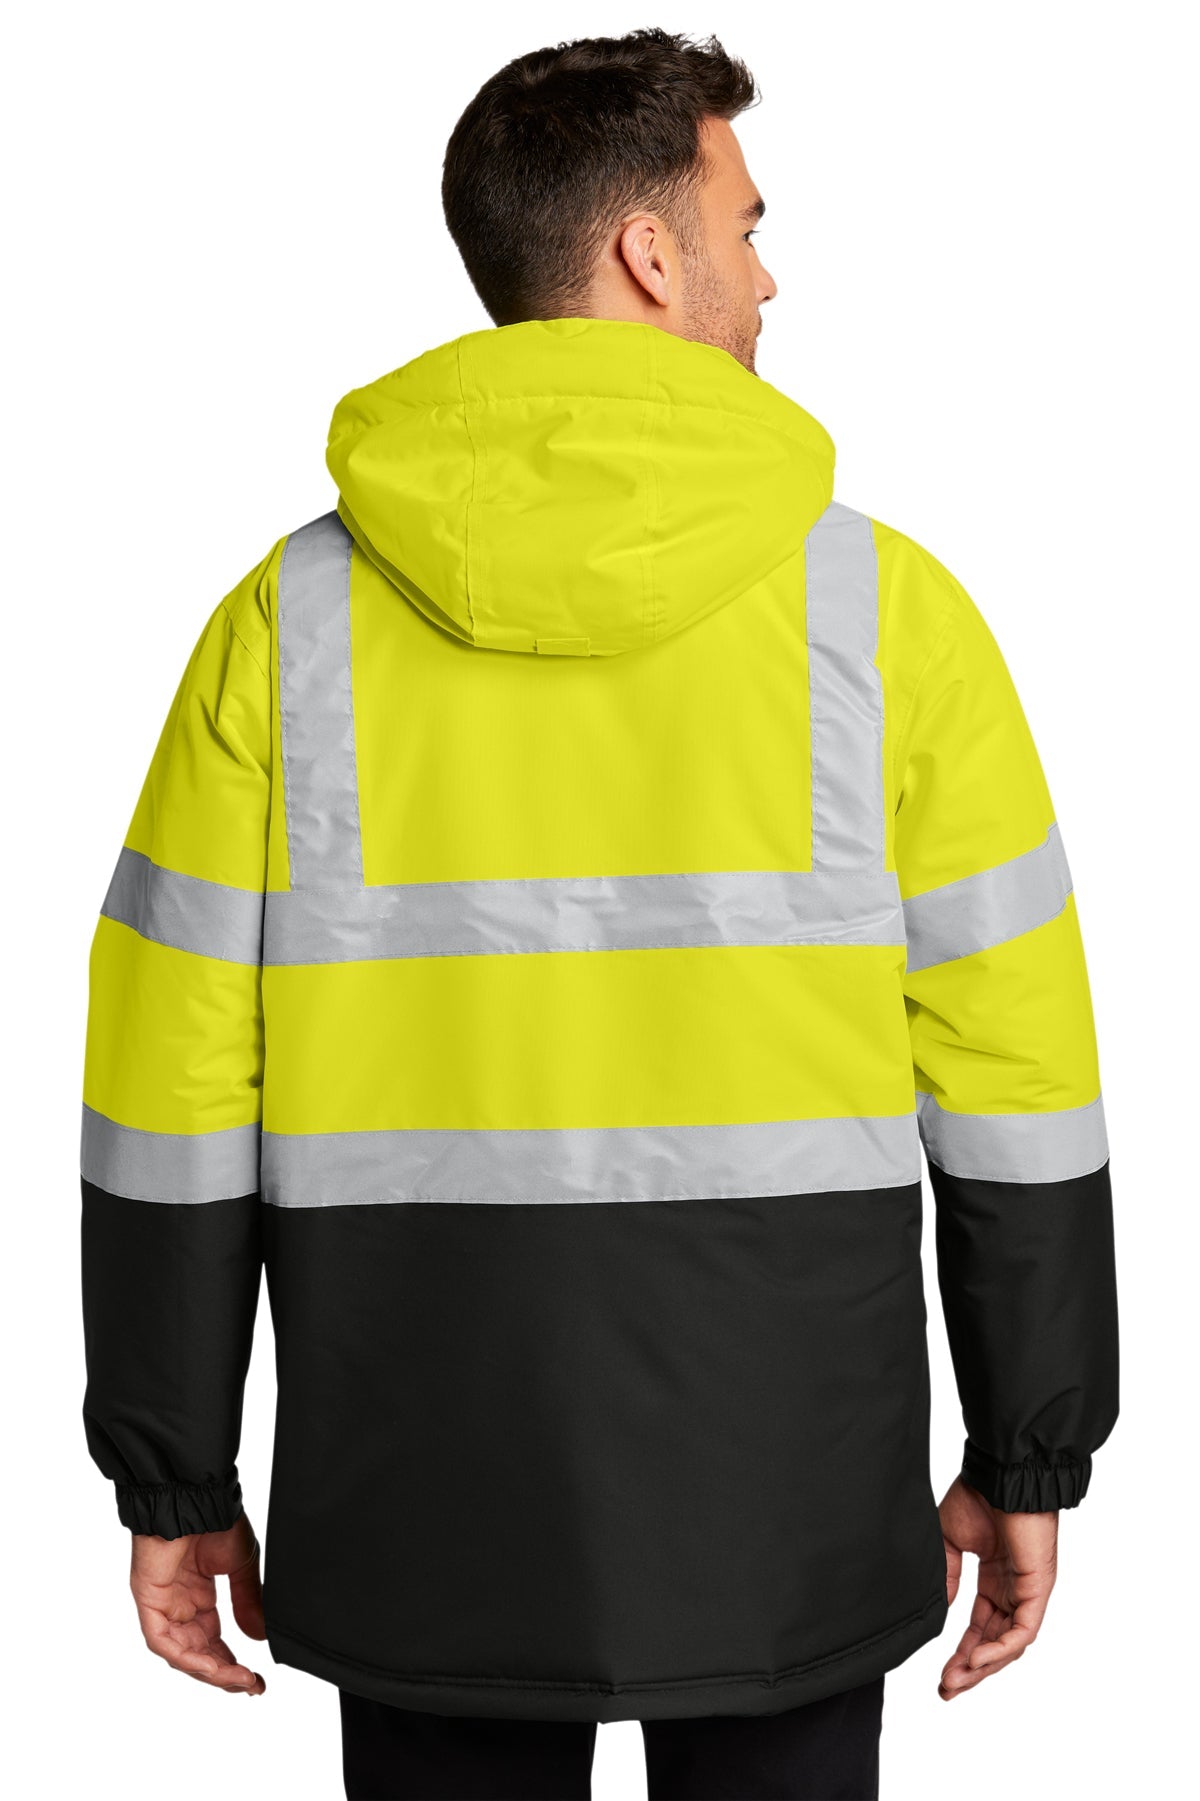 Port Authority ANSI 107 Class 3 Safety Customized Heavyweight Parkas, Safety Yellow/ Black/ Reflective